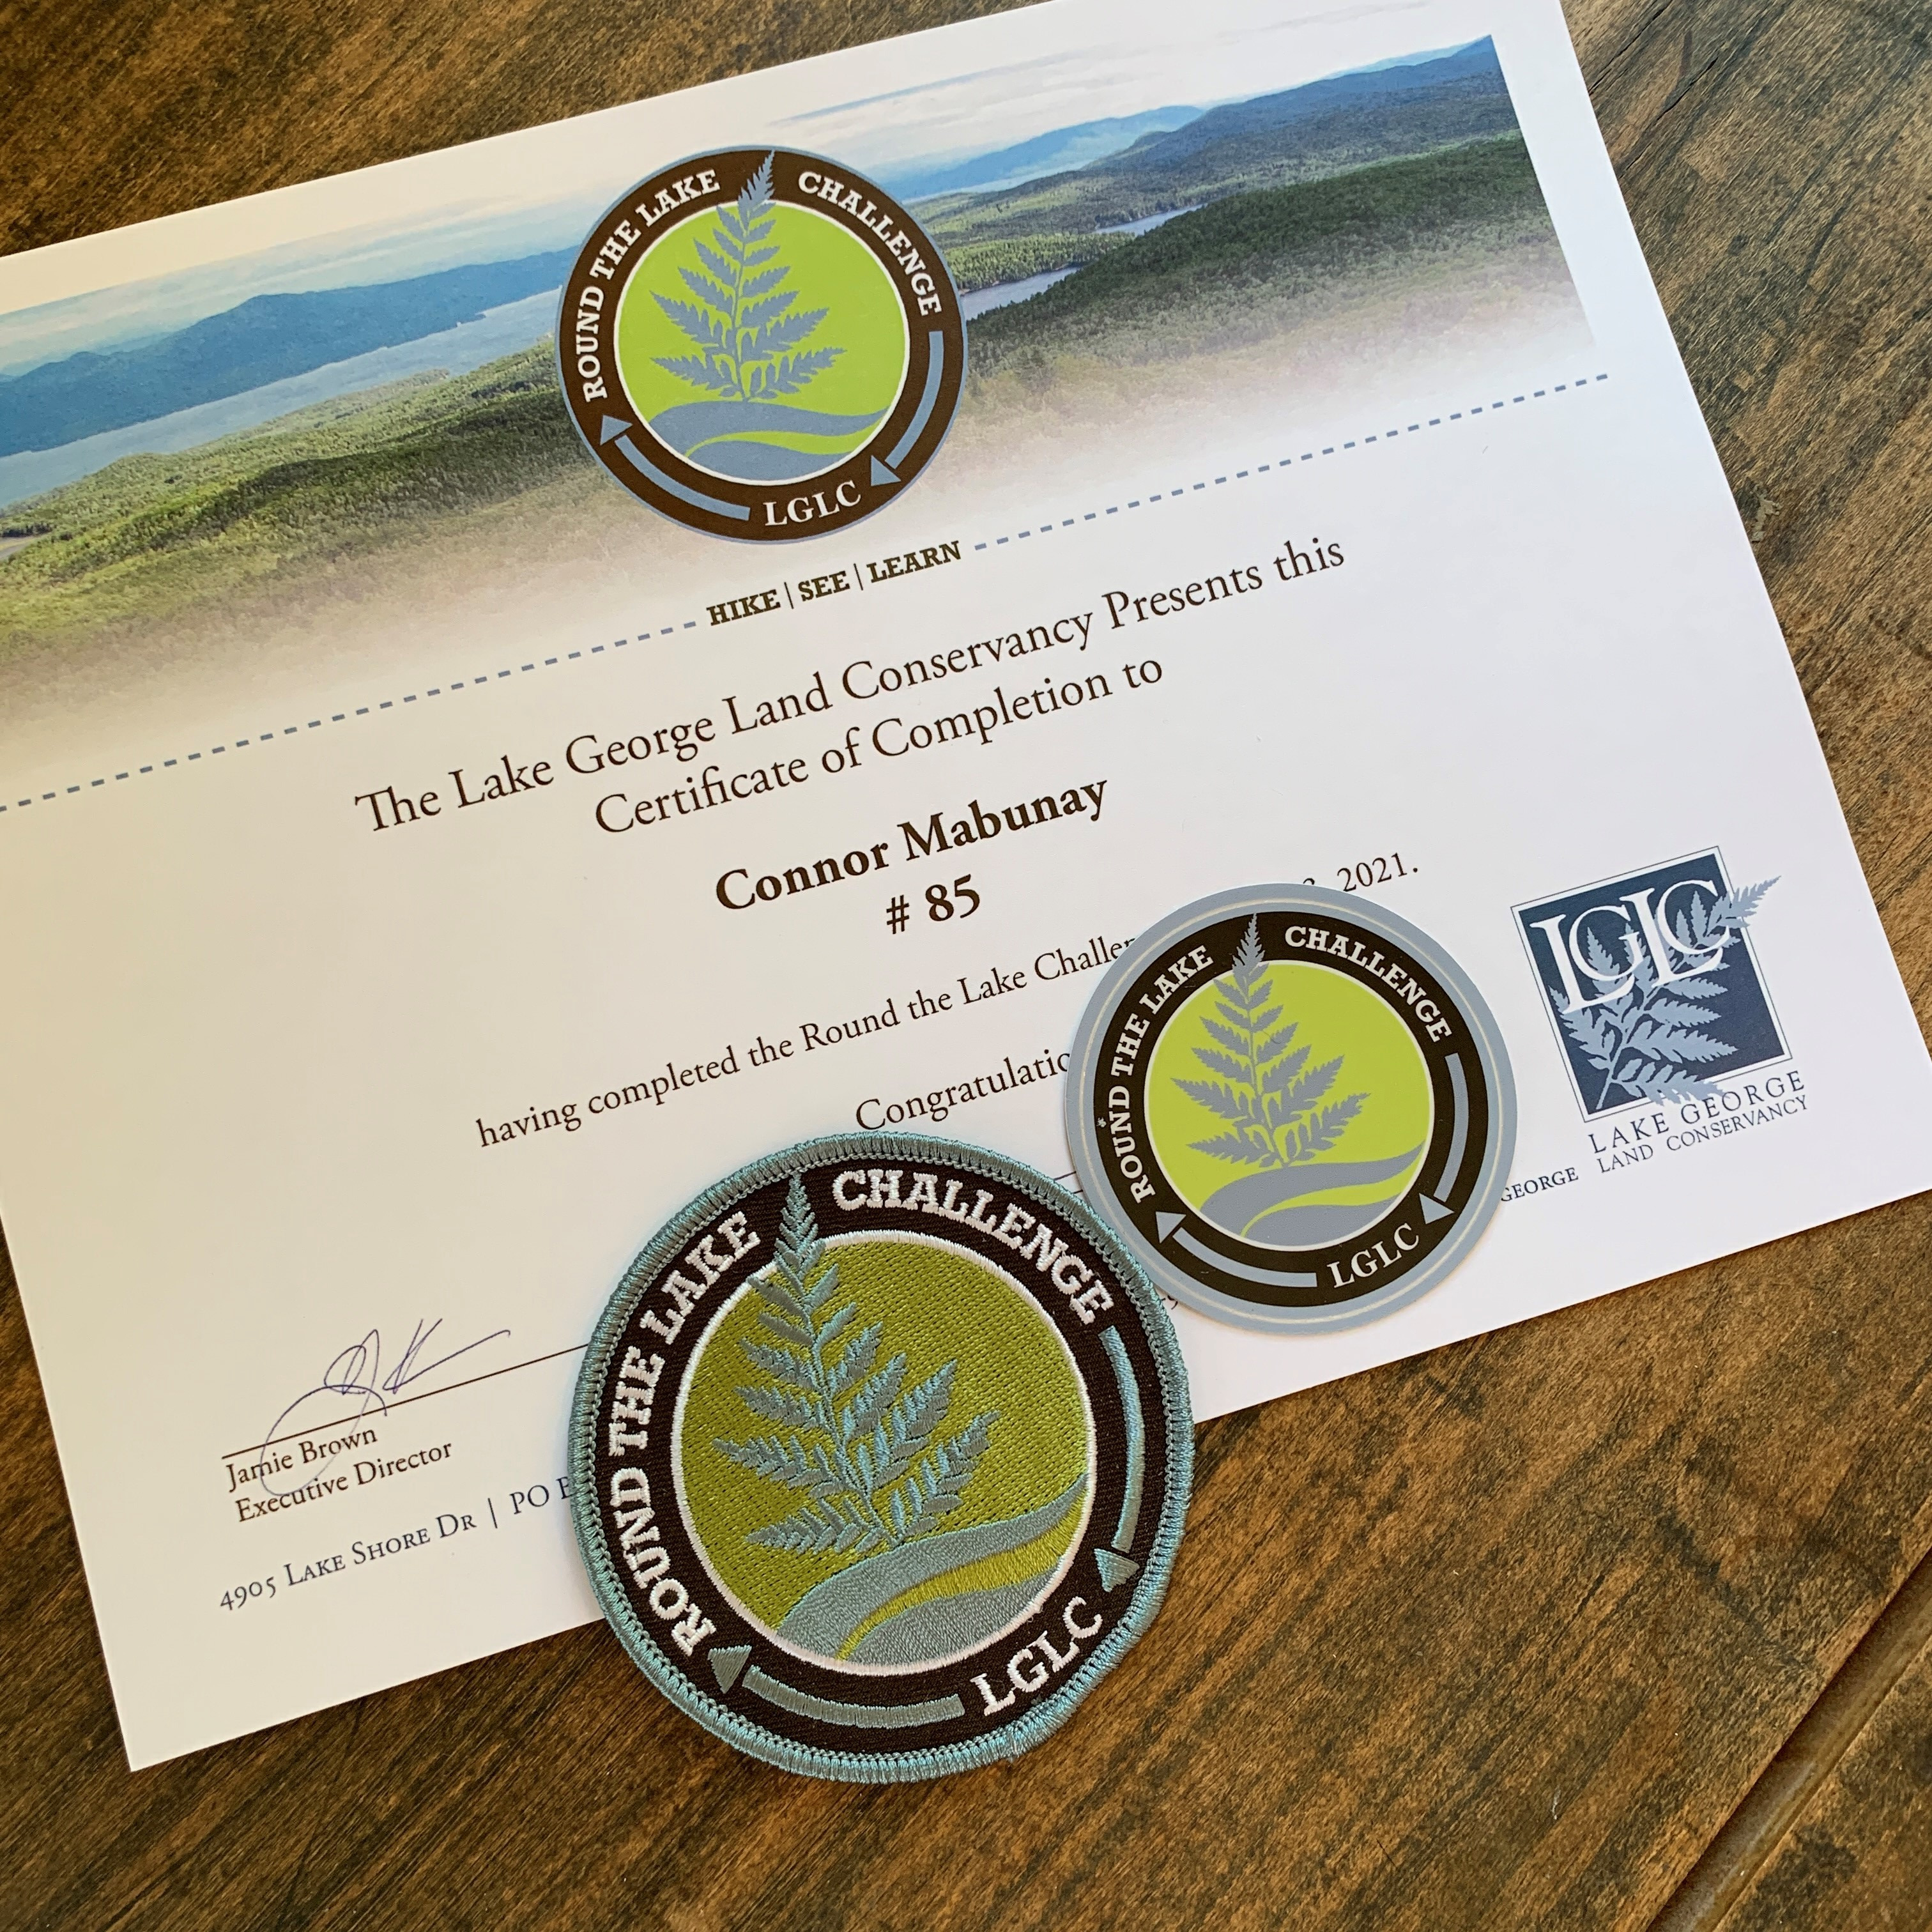 Round the Lake Certificate and patch